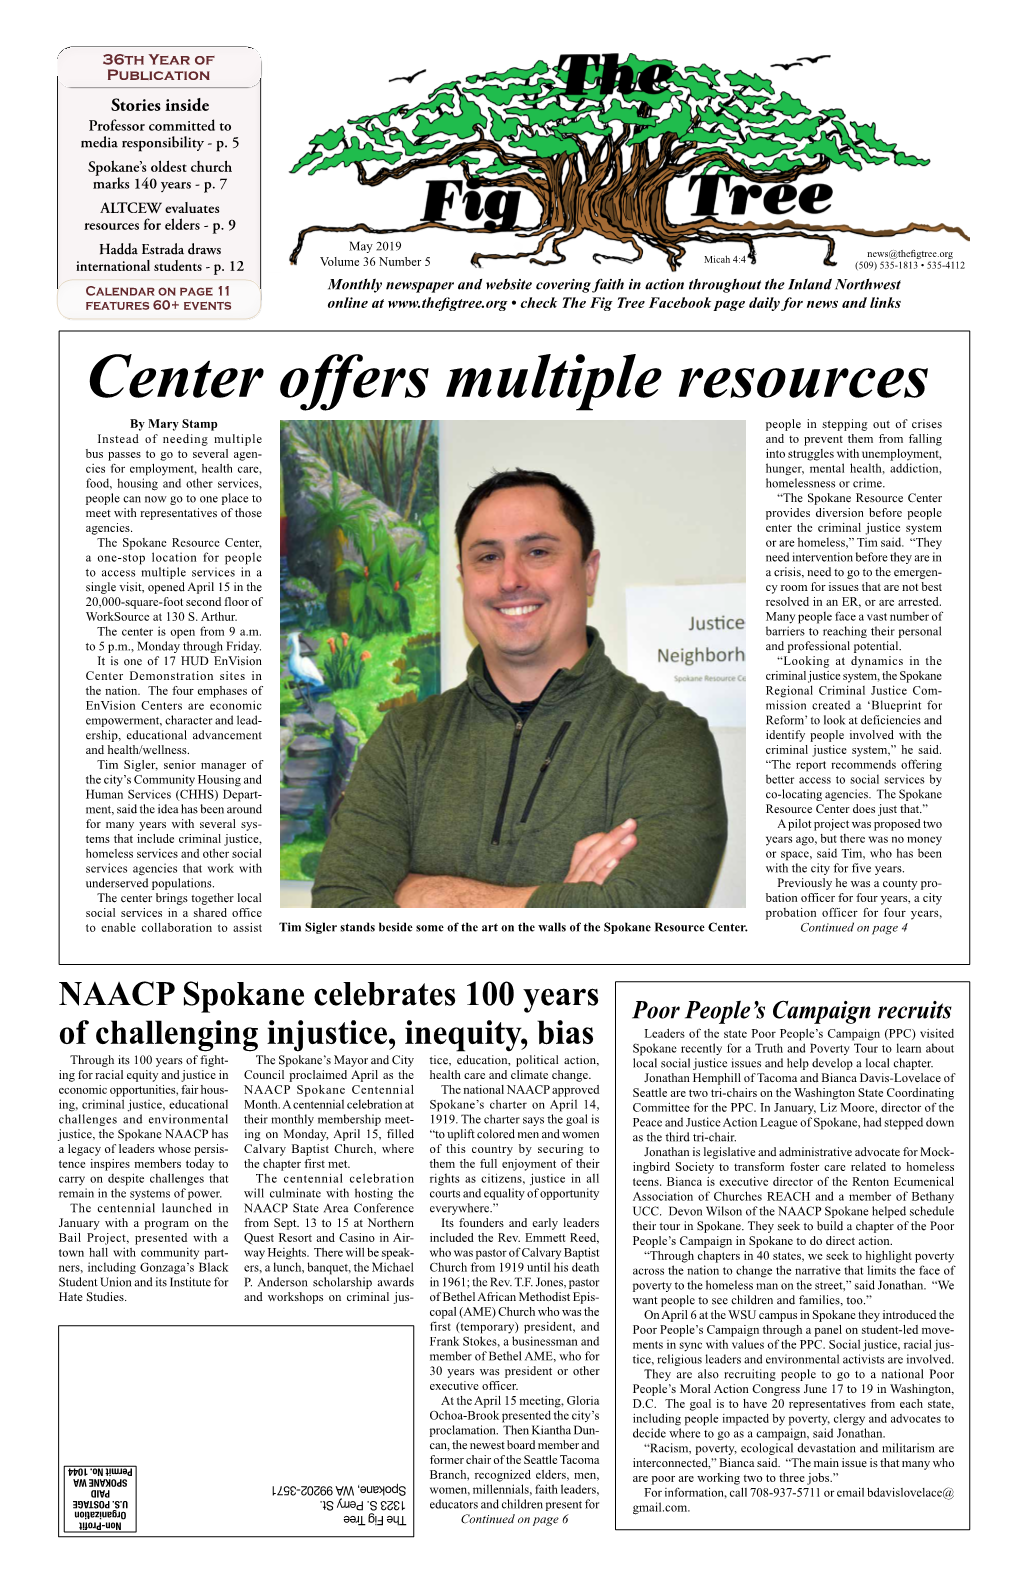 Center Offers Multiple Resources